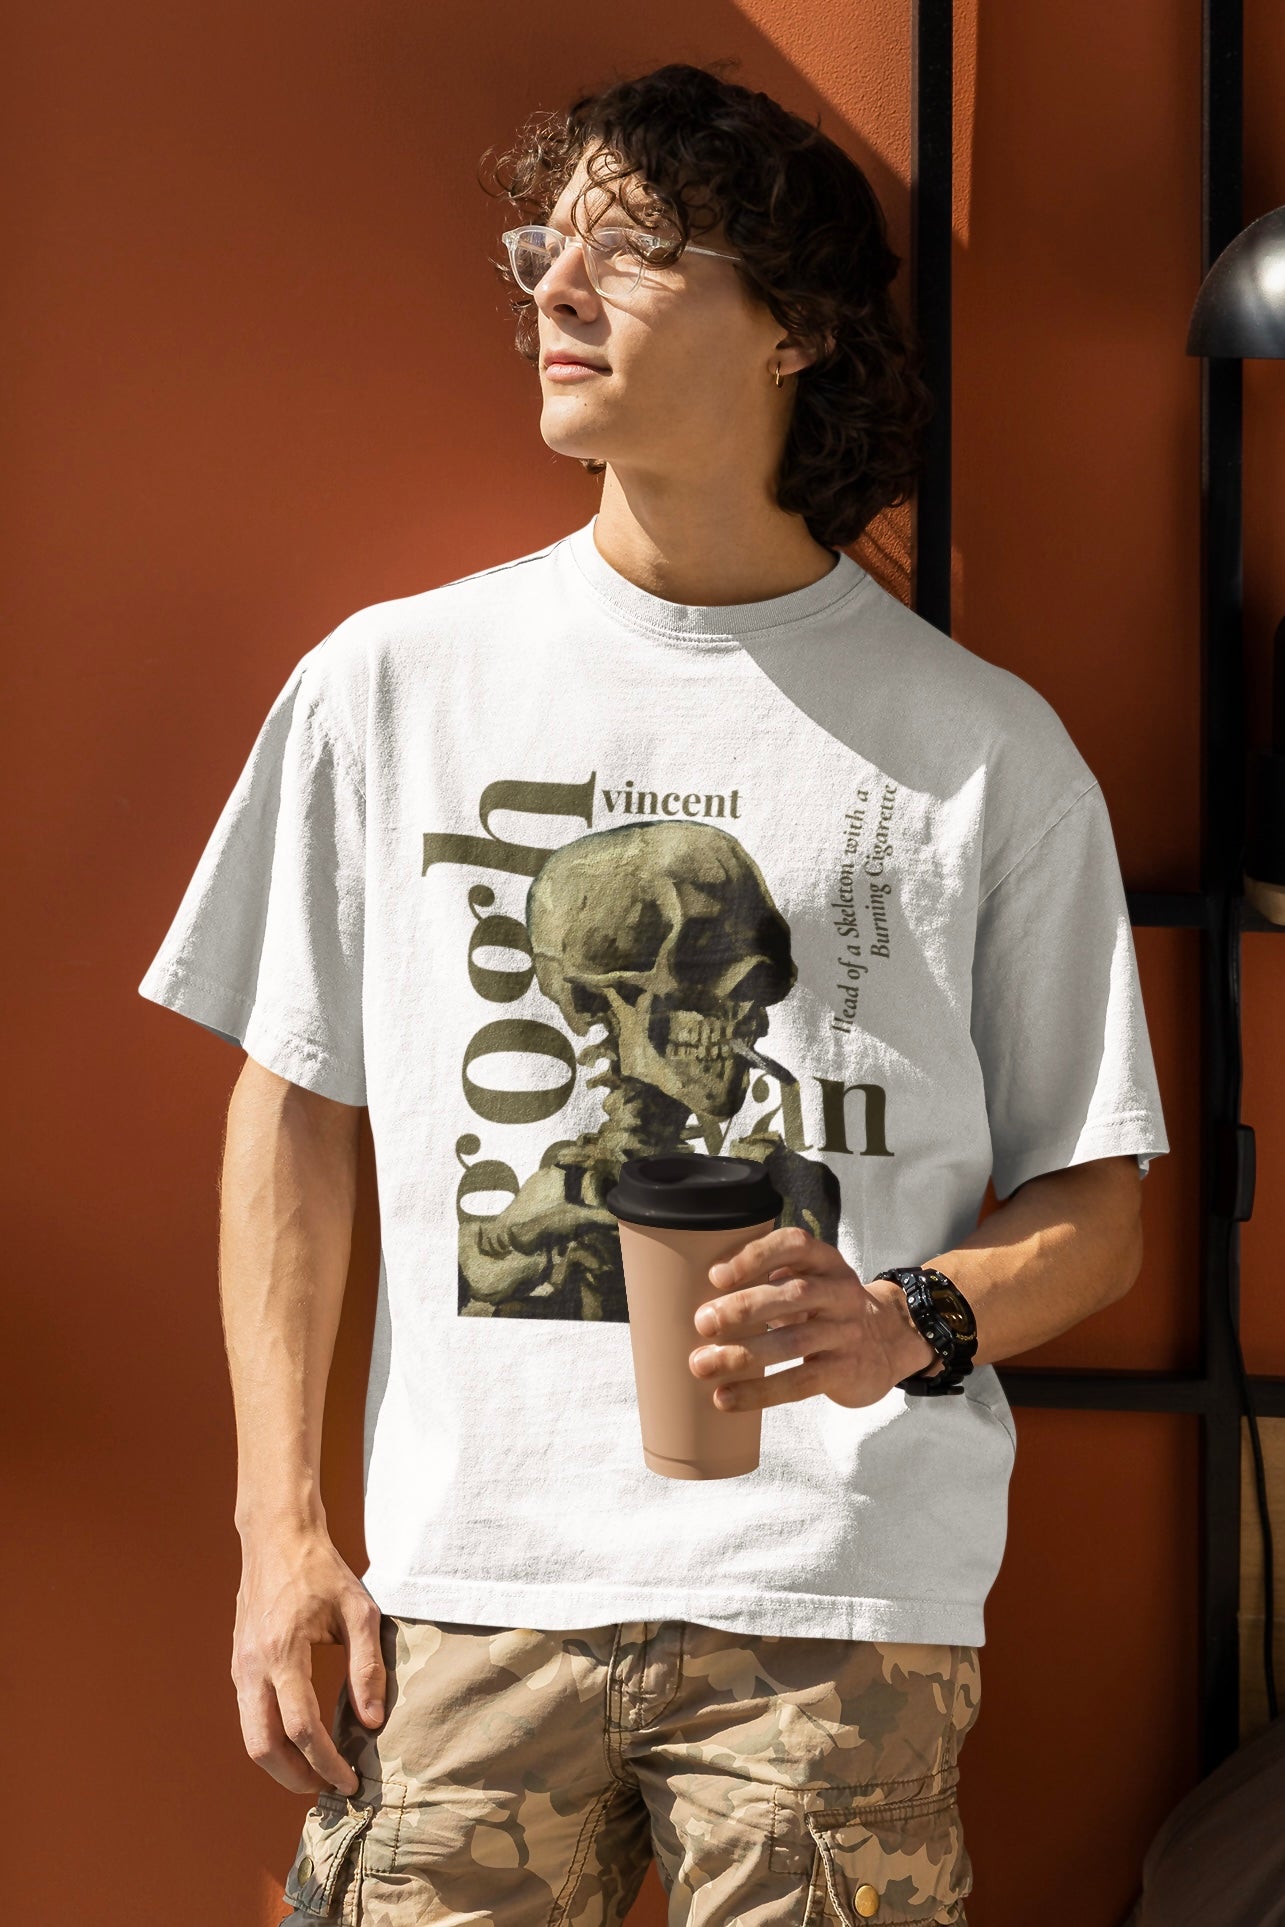 Skull of a Skeleton with Burning Cigarette (Vincent Van Gogh) Graphic Printed Unisex White Oversized T Shirt